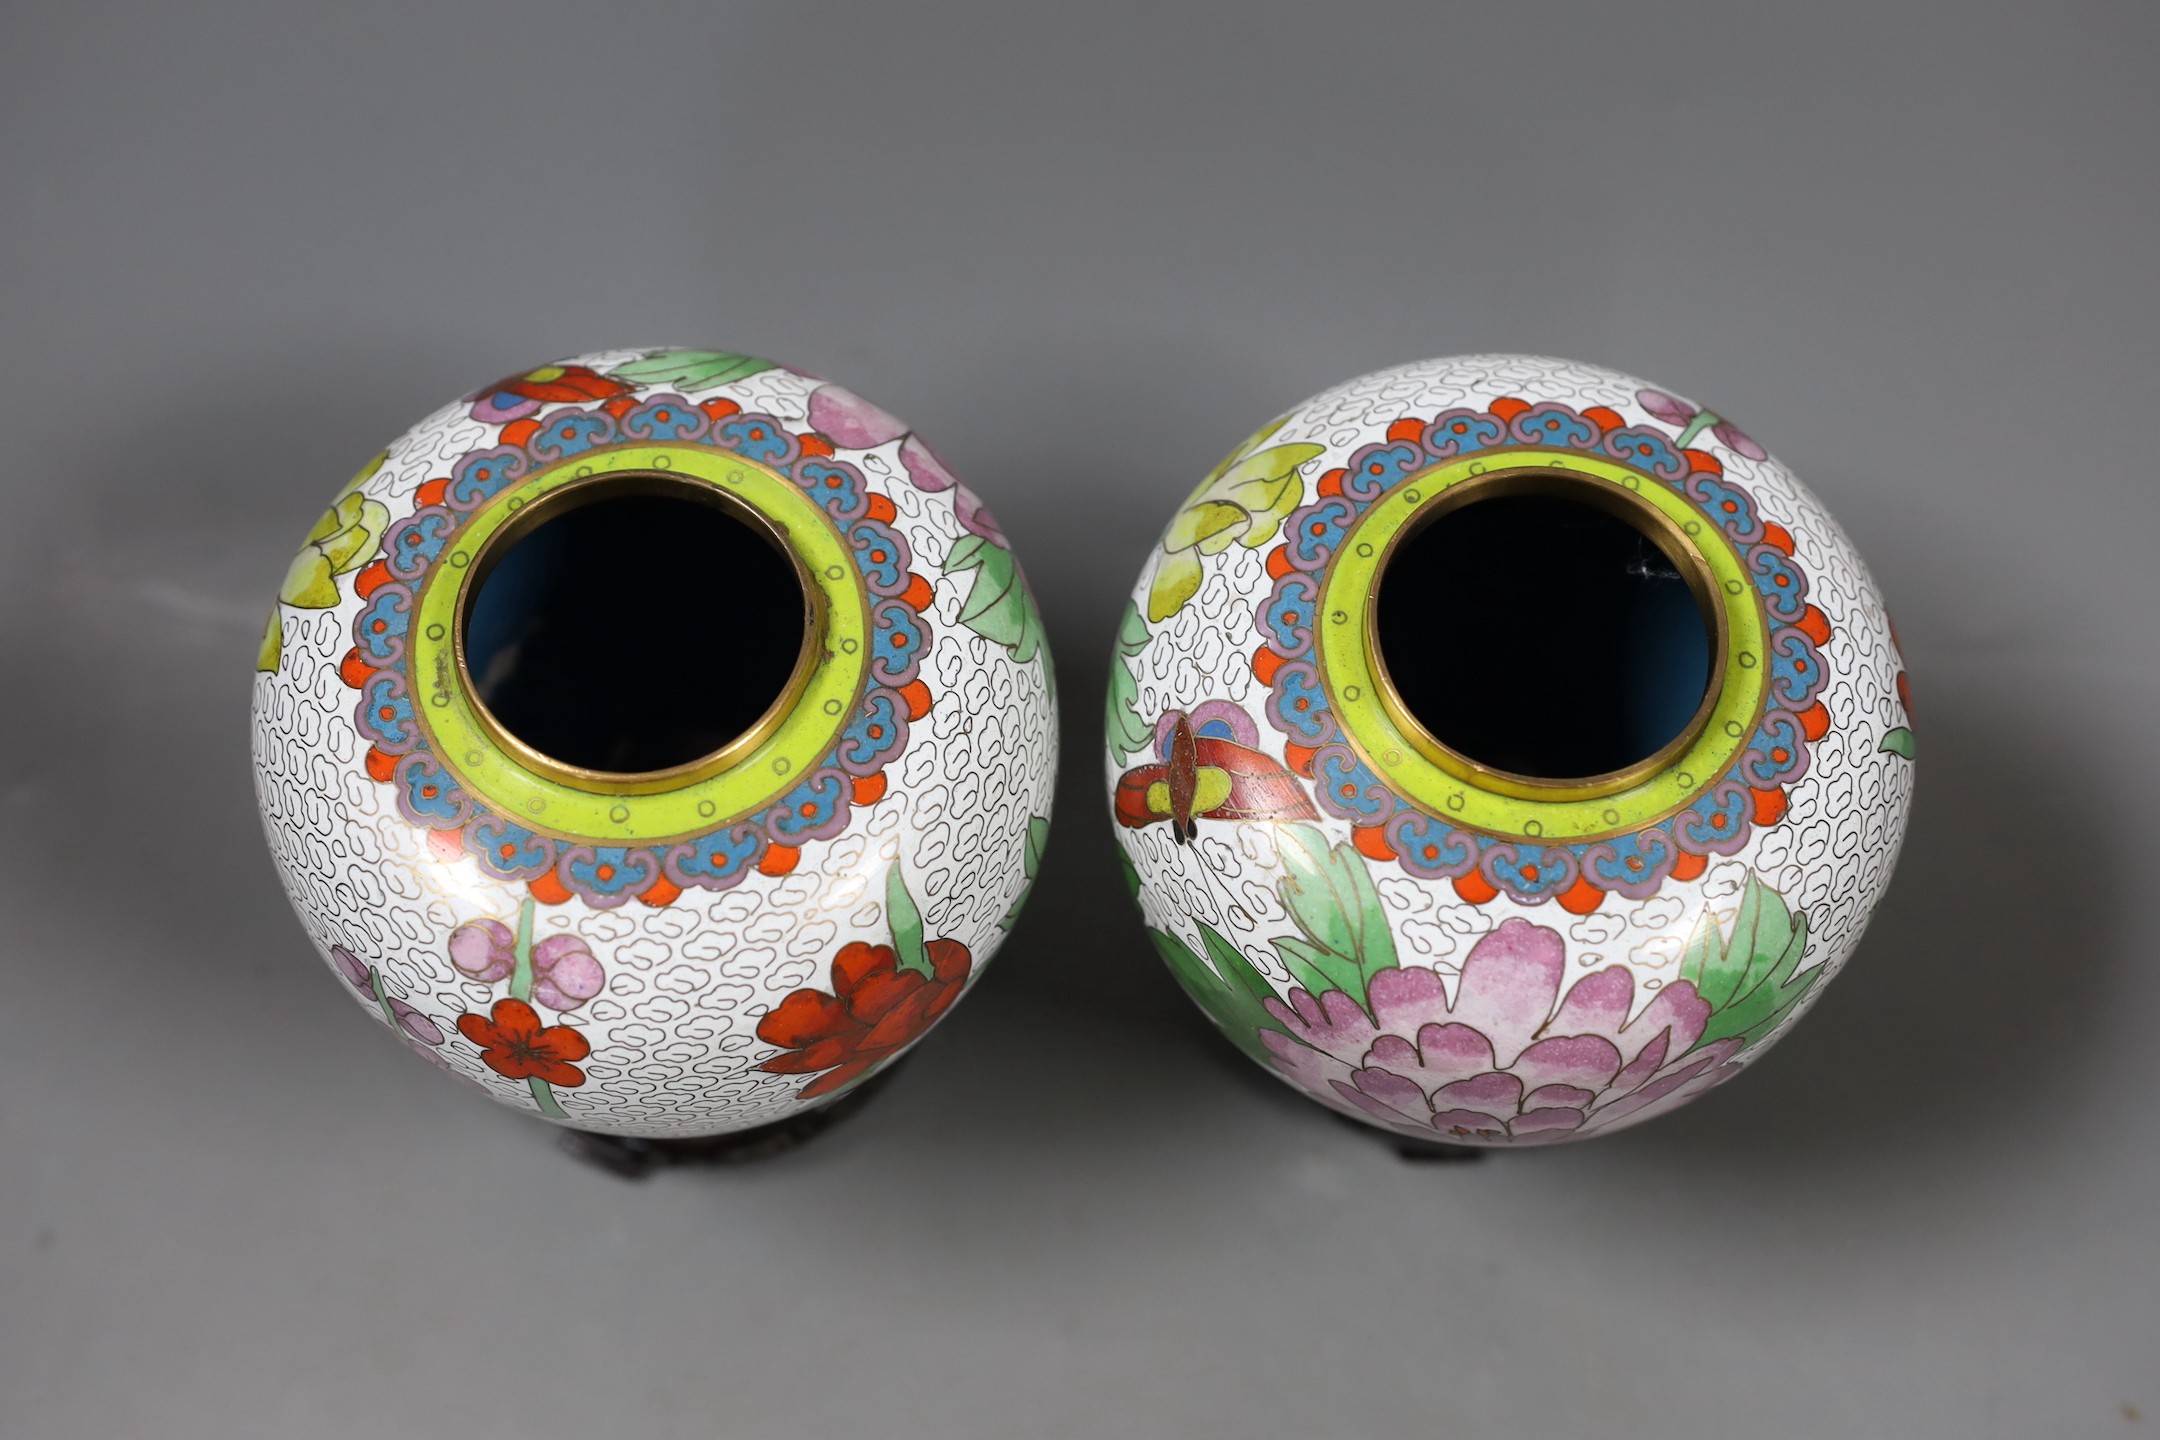 A pair of Chinese cloisonné enamel jars and covers on stands, total height 15.5 cm - Image 4 of 5